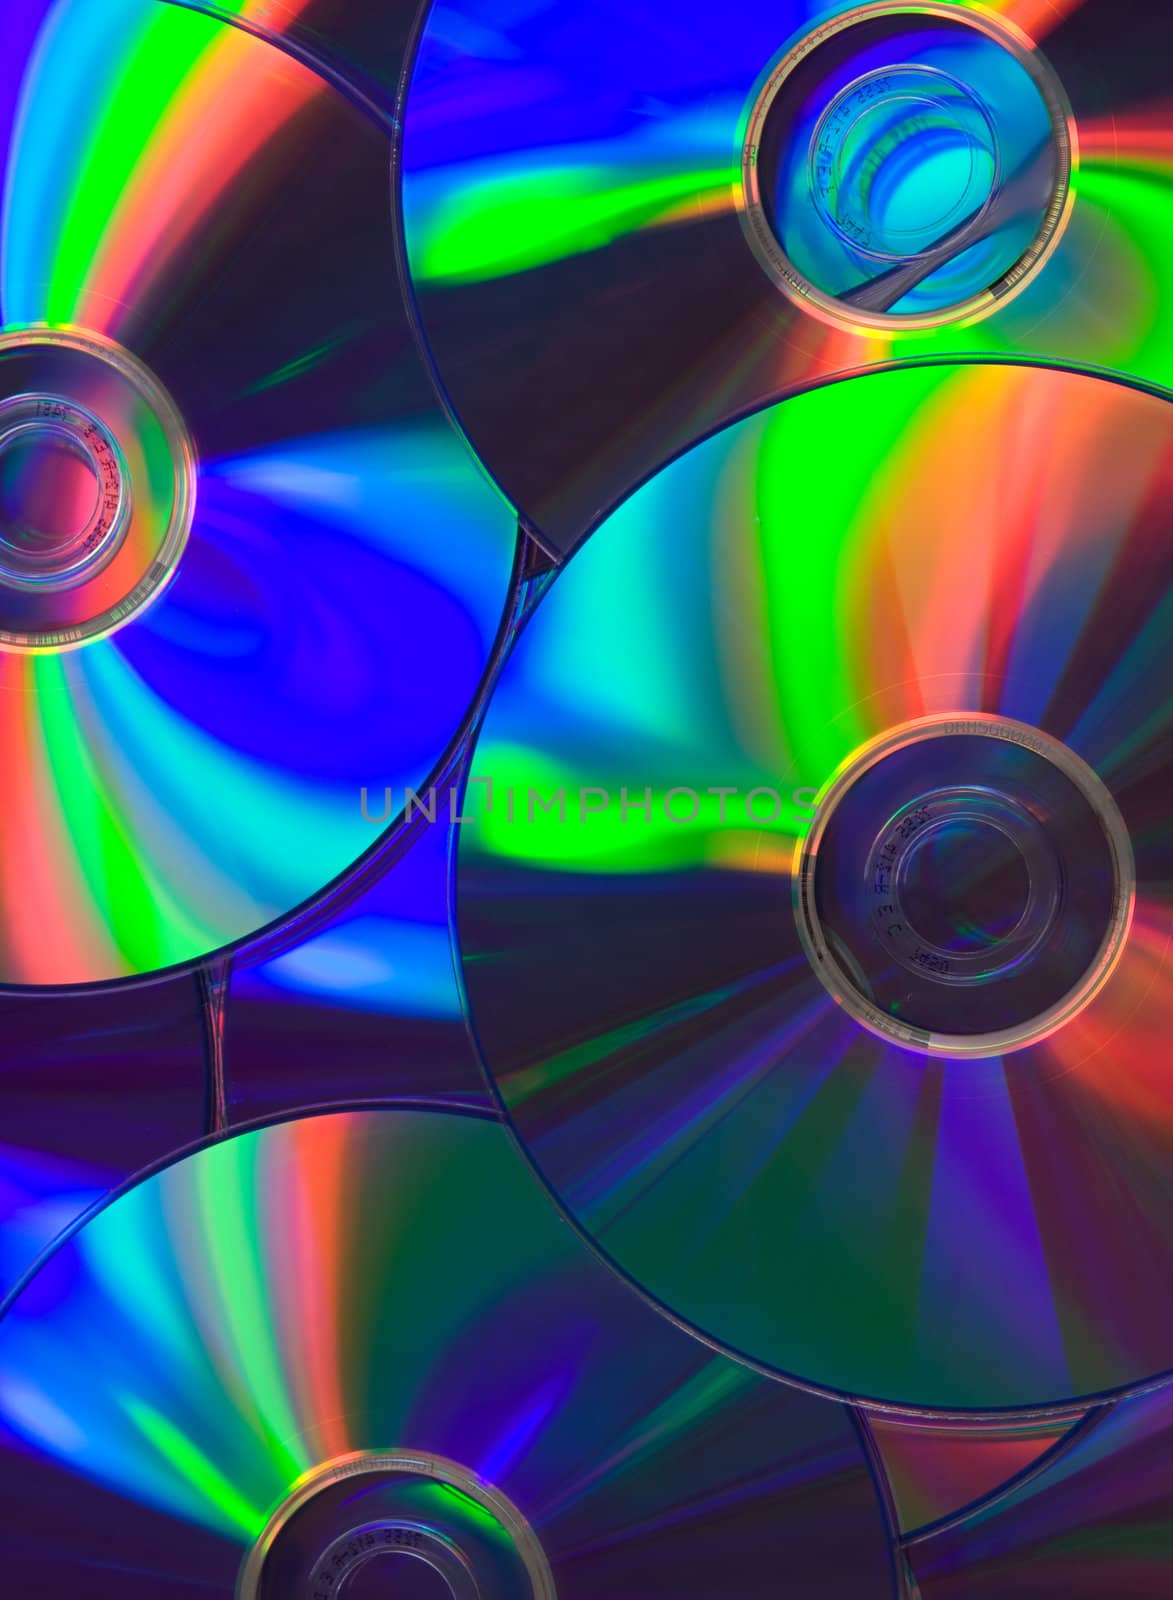 Compact disc background